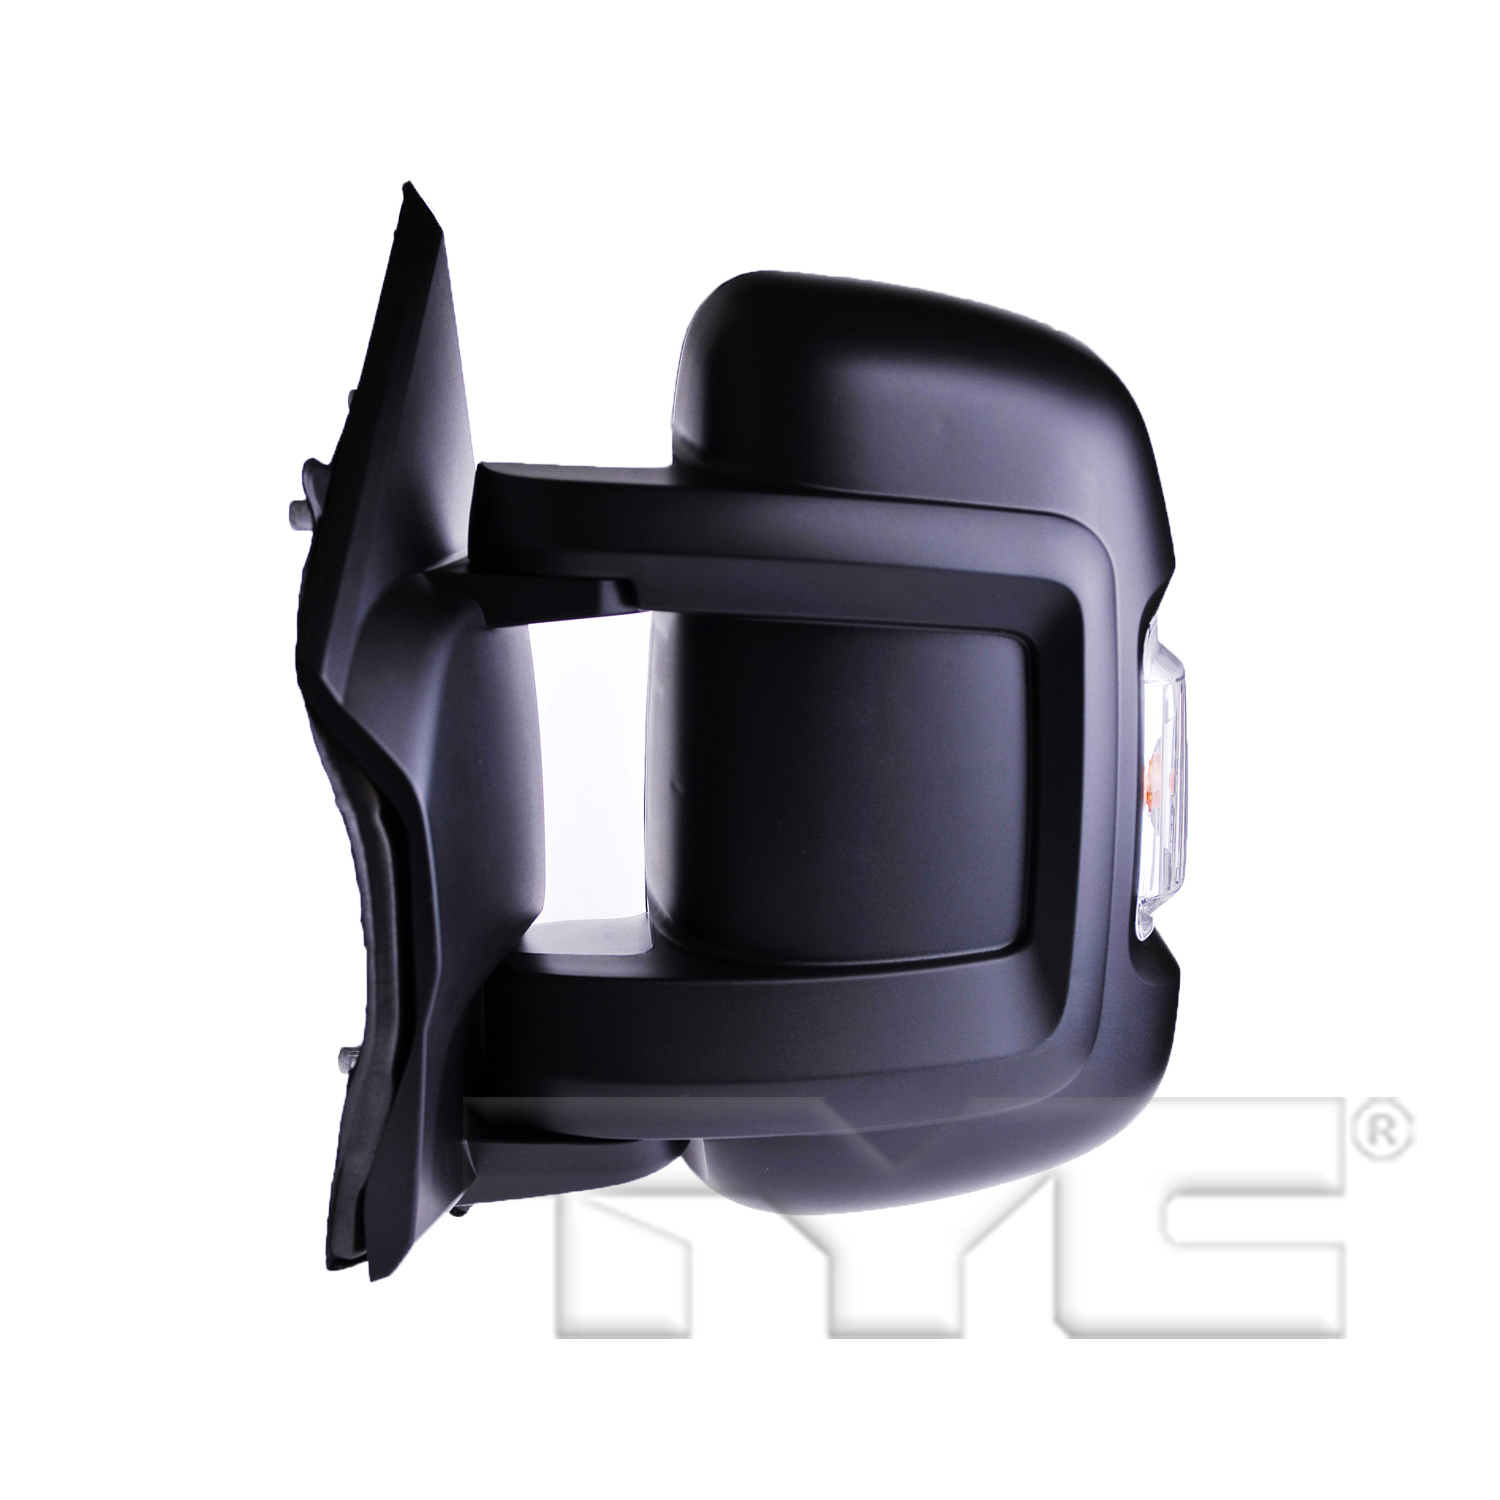 Aftermarket MIRRORS for RAM - PROMASTER 1500, PROMASTER 1500,14-23,LT Mirror outside rear view